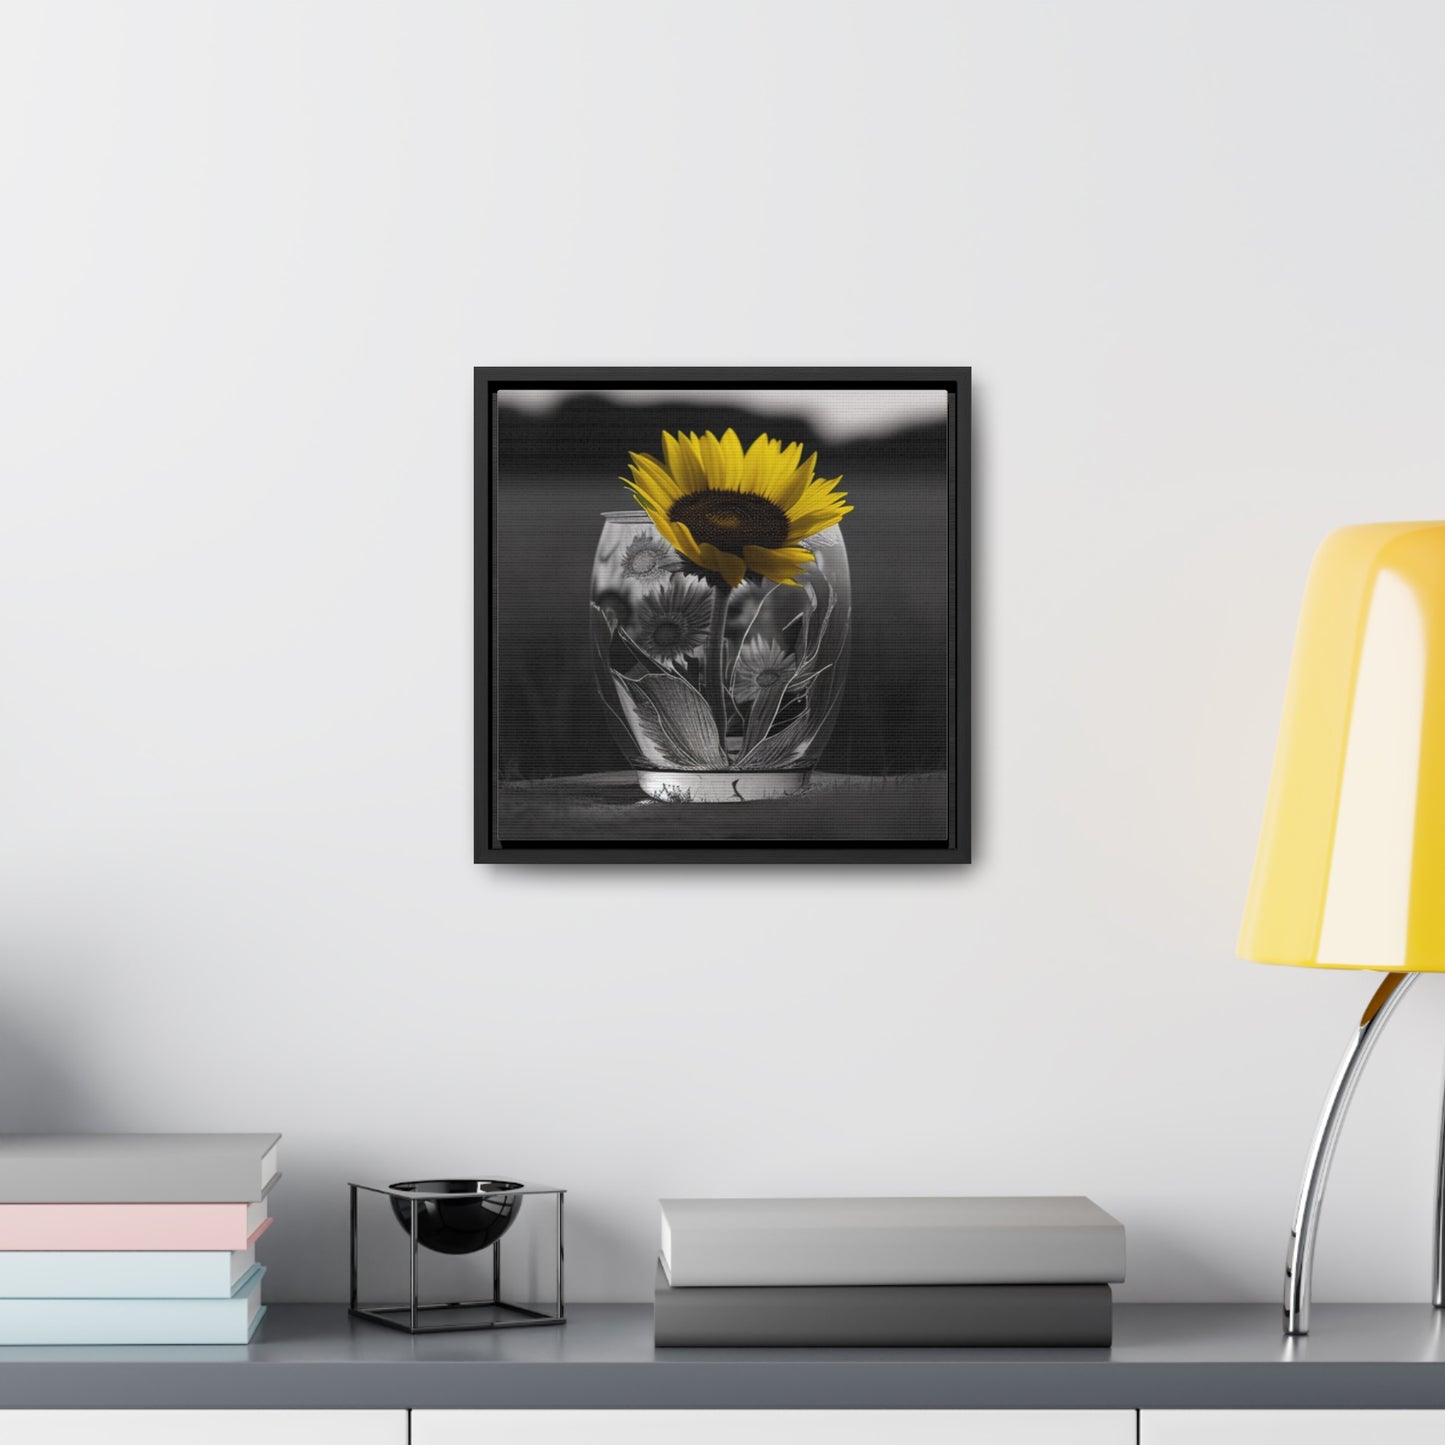 Gallery Canvas Wraps, Square Frame Yellw Sunflower in a vase 1